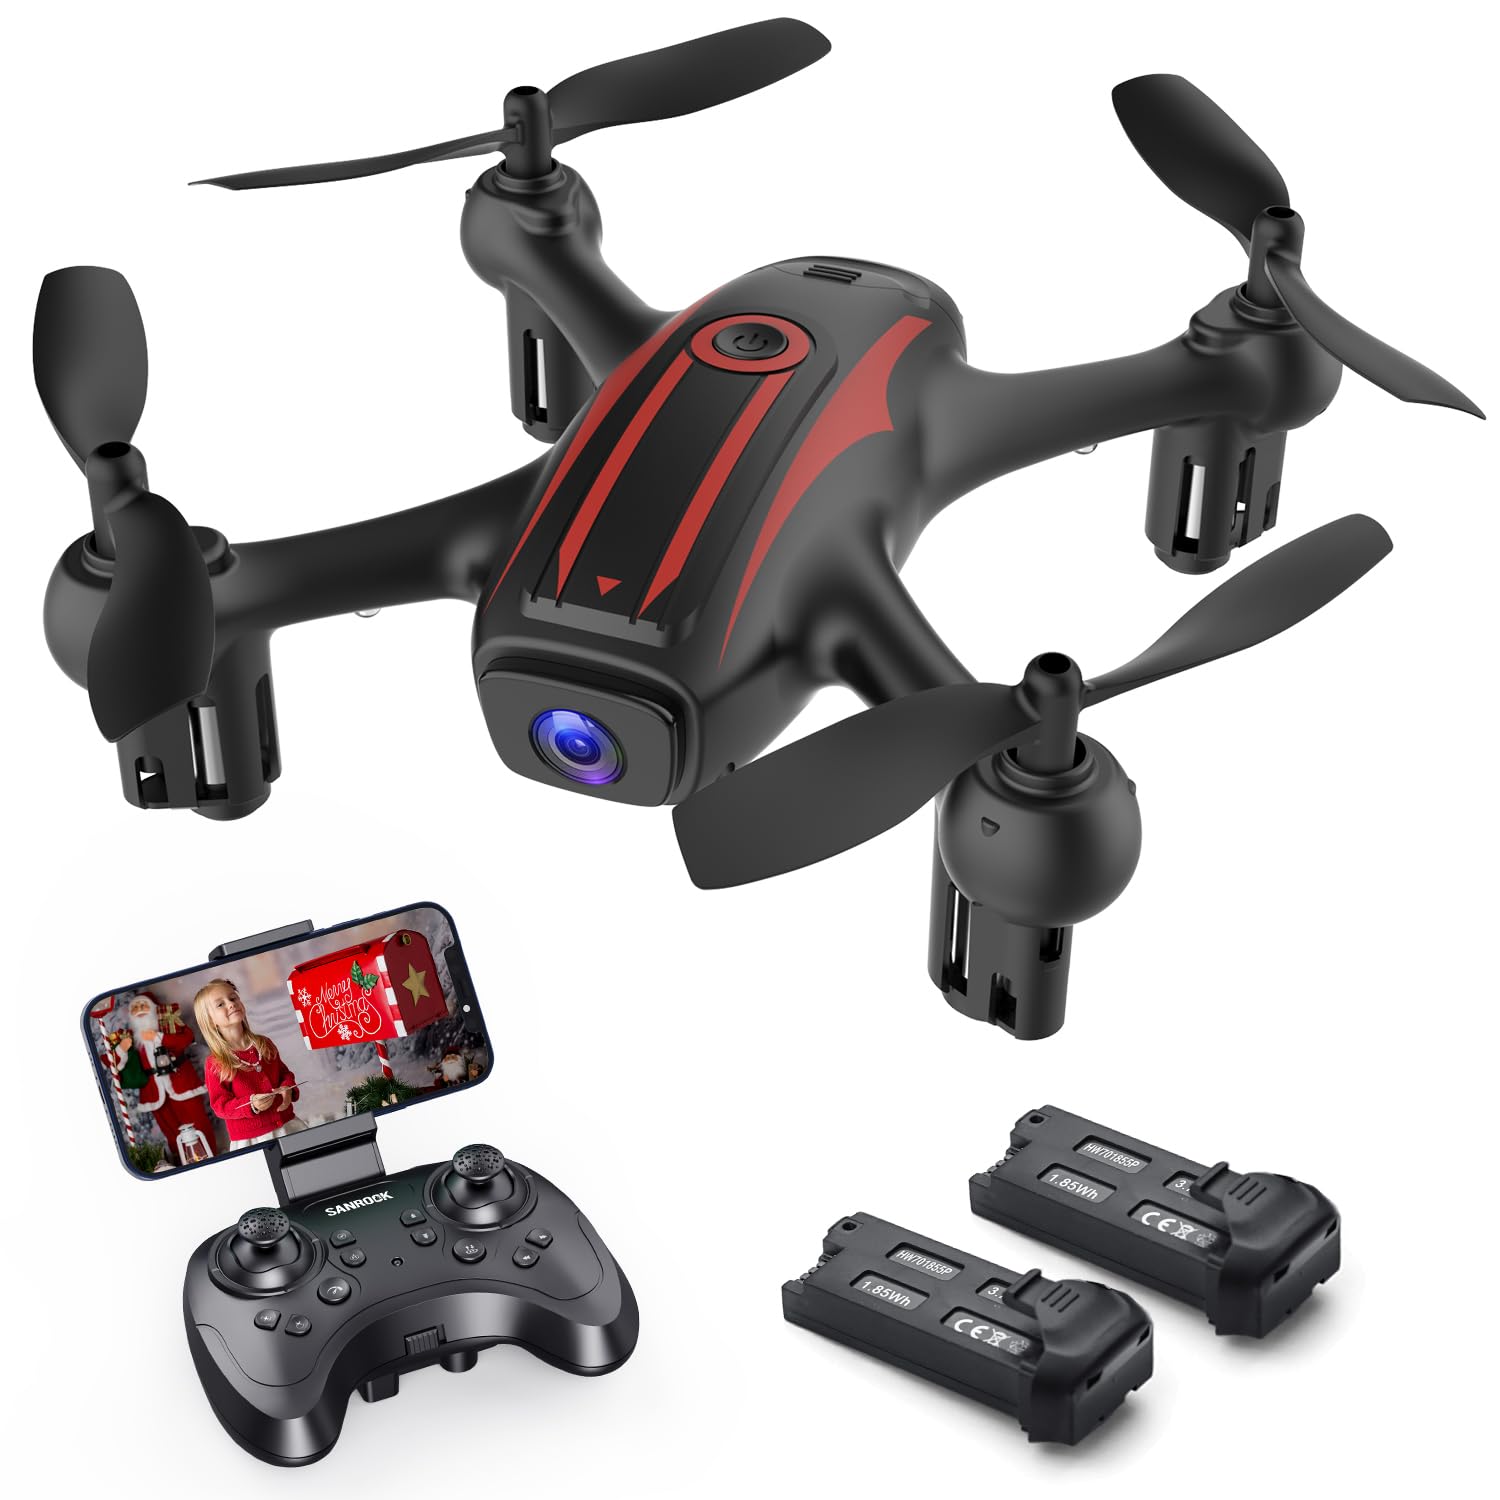 Elukiko Drone with Camera for Adults Kids, 1080P HD FPV WIFI Mini Drones, RC Quadcopter Helicopter with 2 Batteries, Throw to Go, High-Speed Rotation, 3D Flips, Waypoints Fly, Gravity Control, Gesture Control, One Key Take Off/Landing, One Key Return, Christmas Gifts for Adults Teens Boys Girls